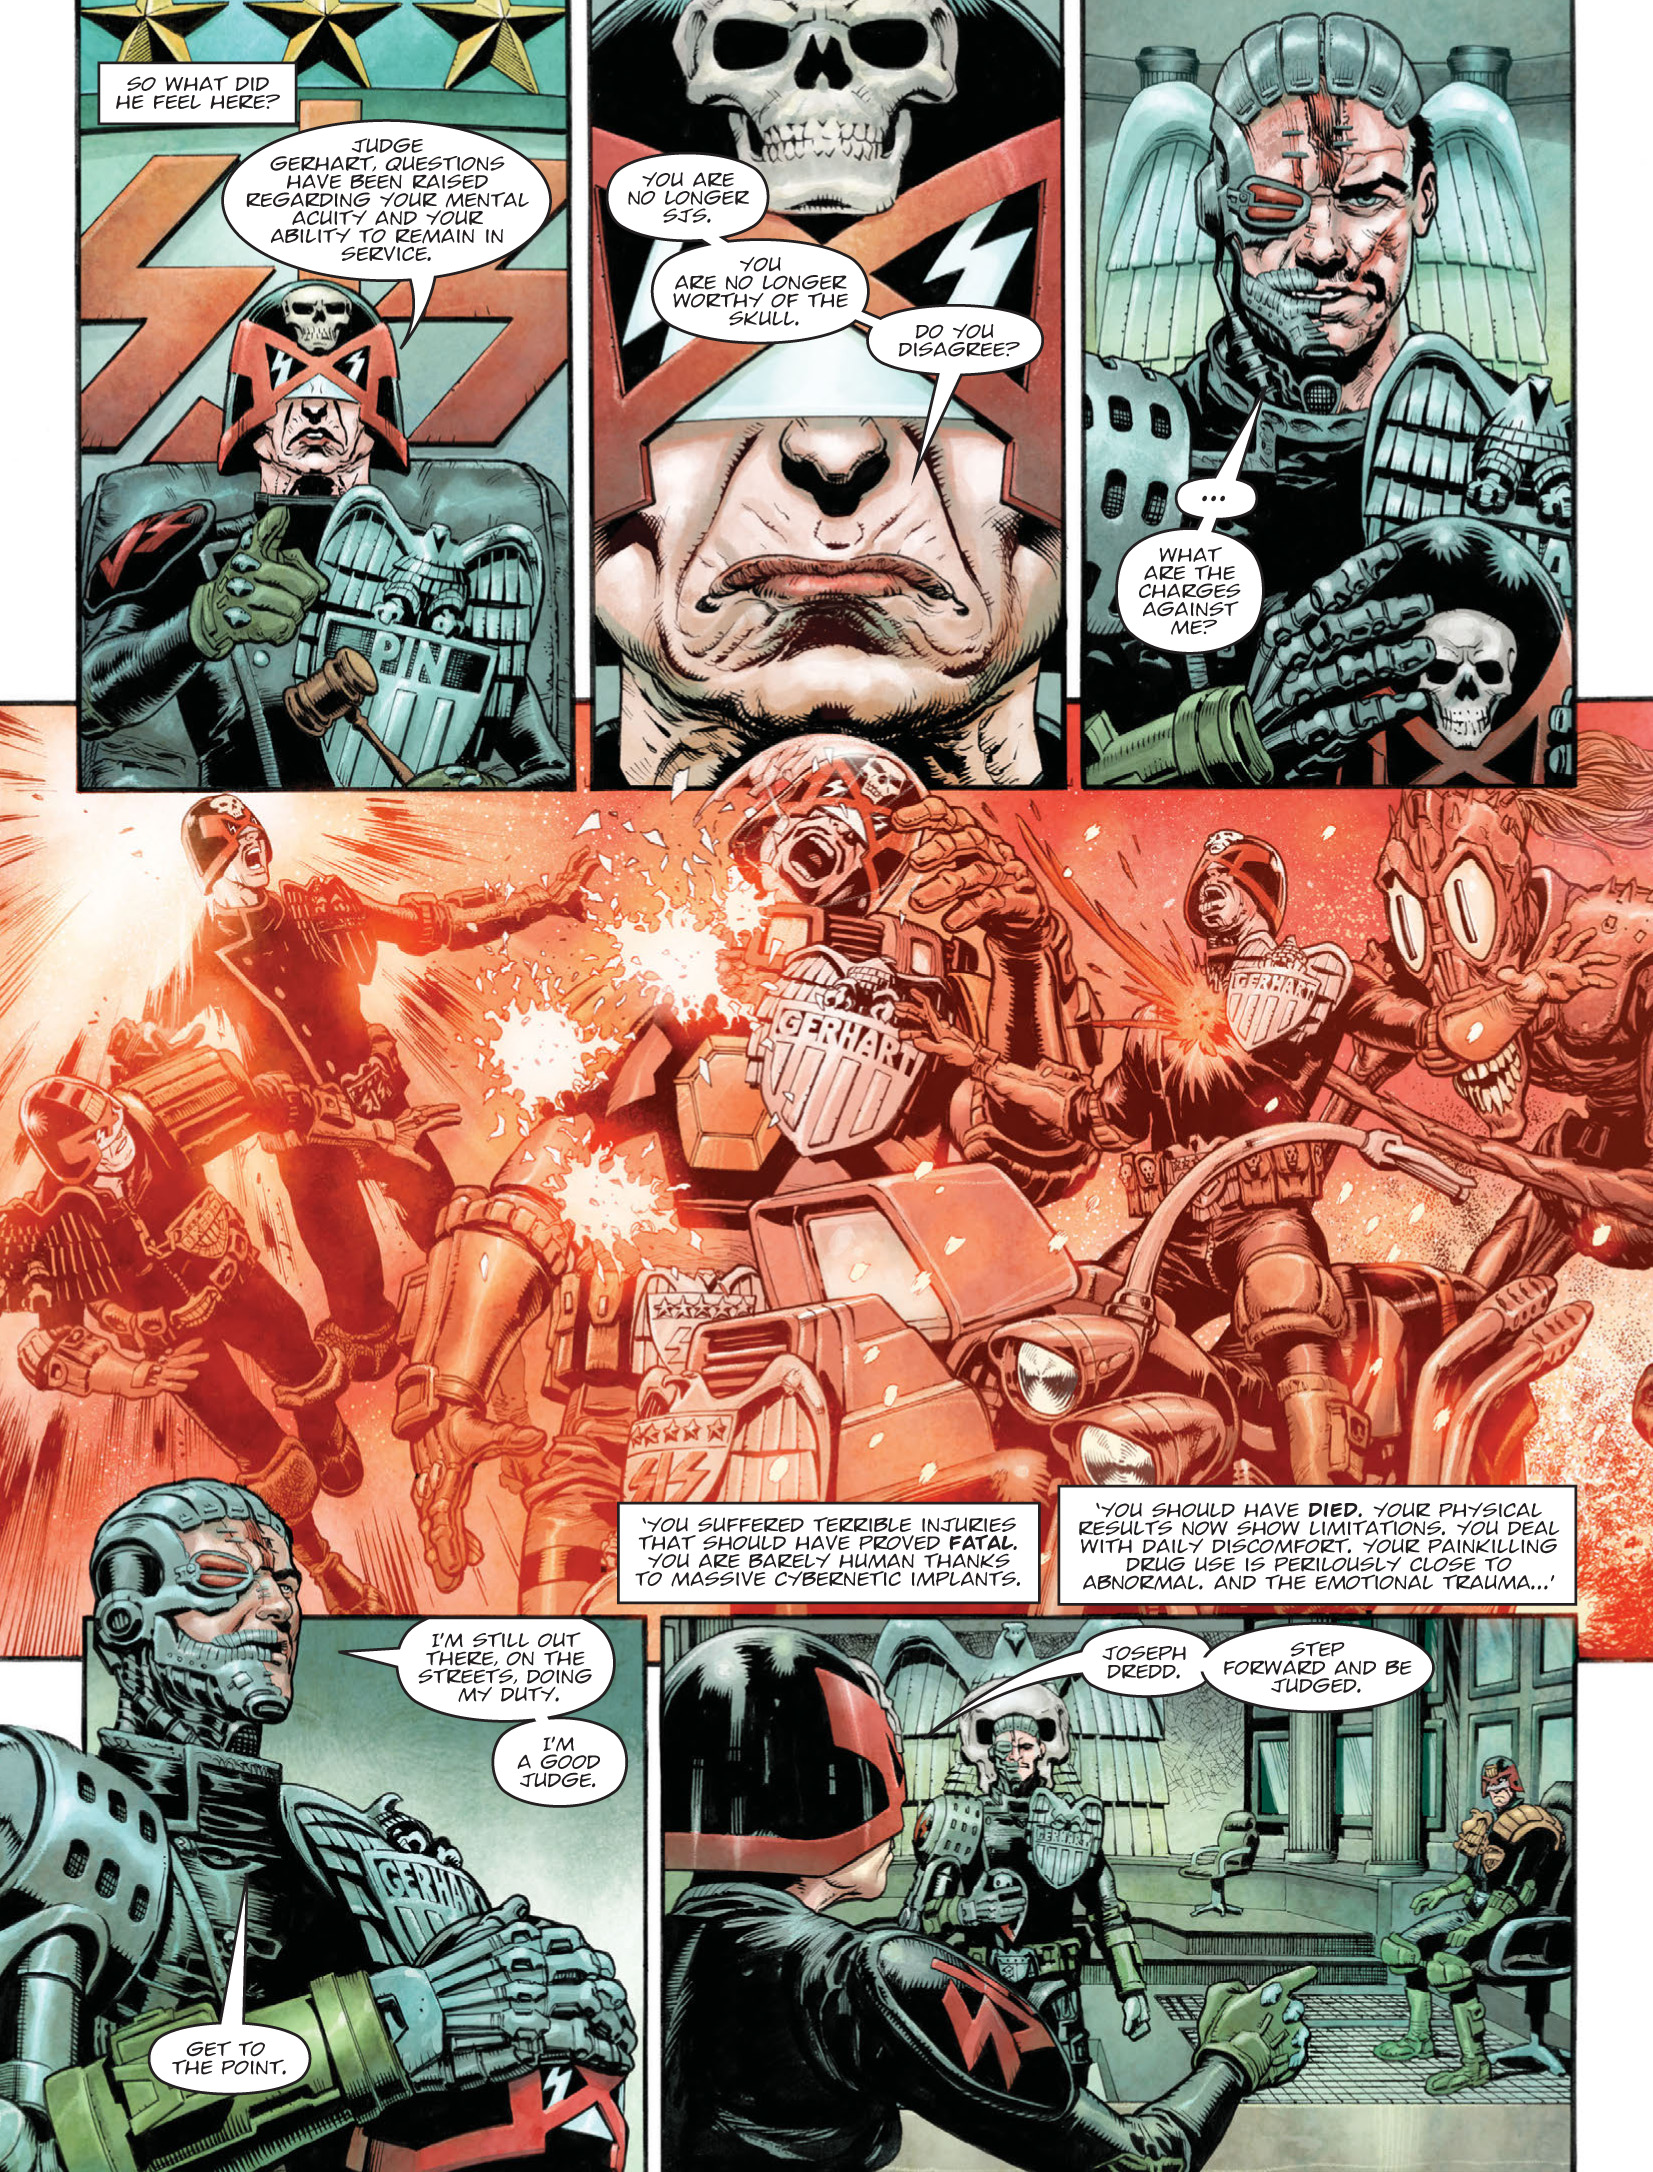 2000 AD: Chapter 2074 - Page 4